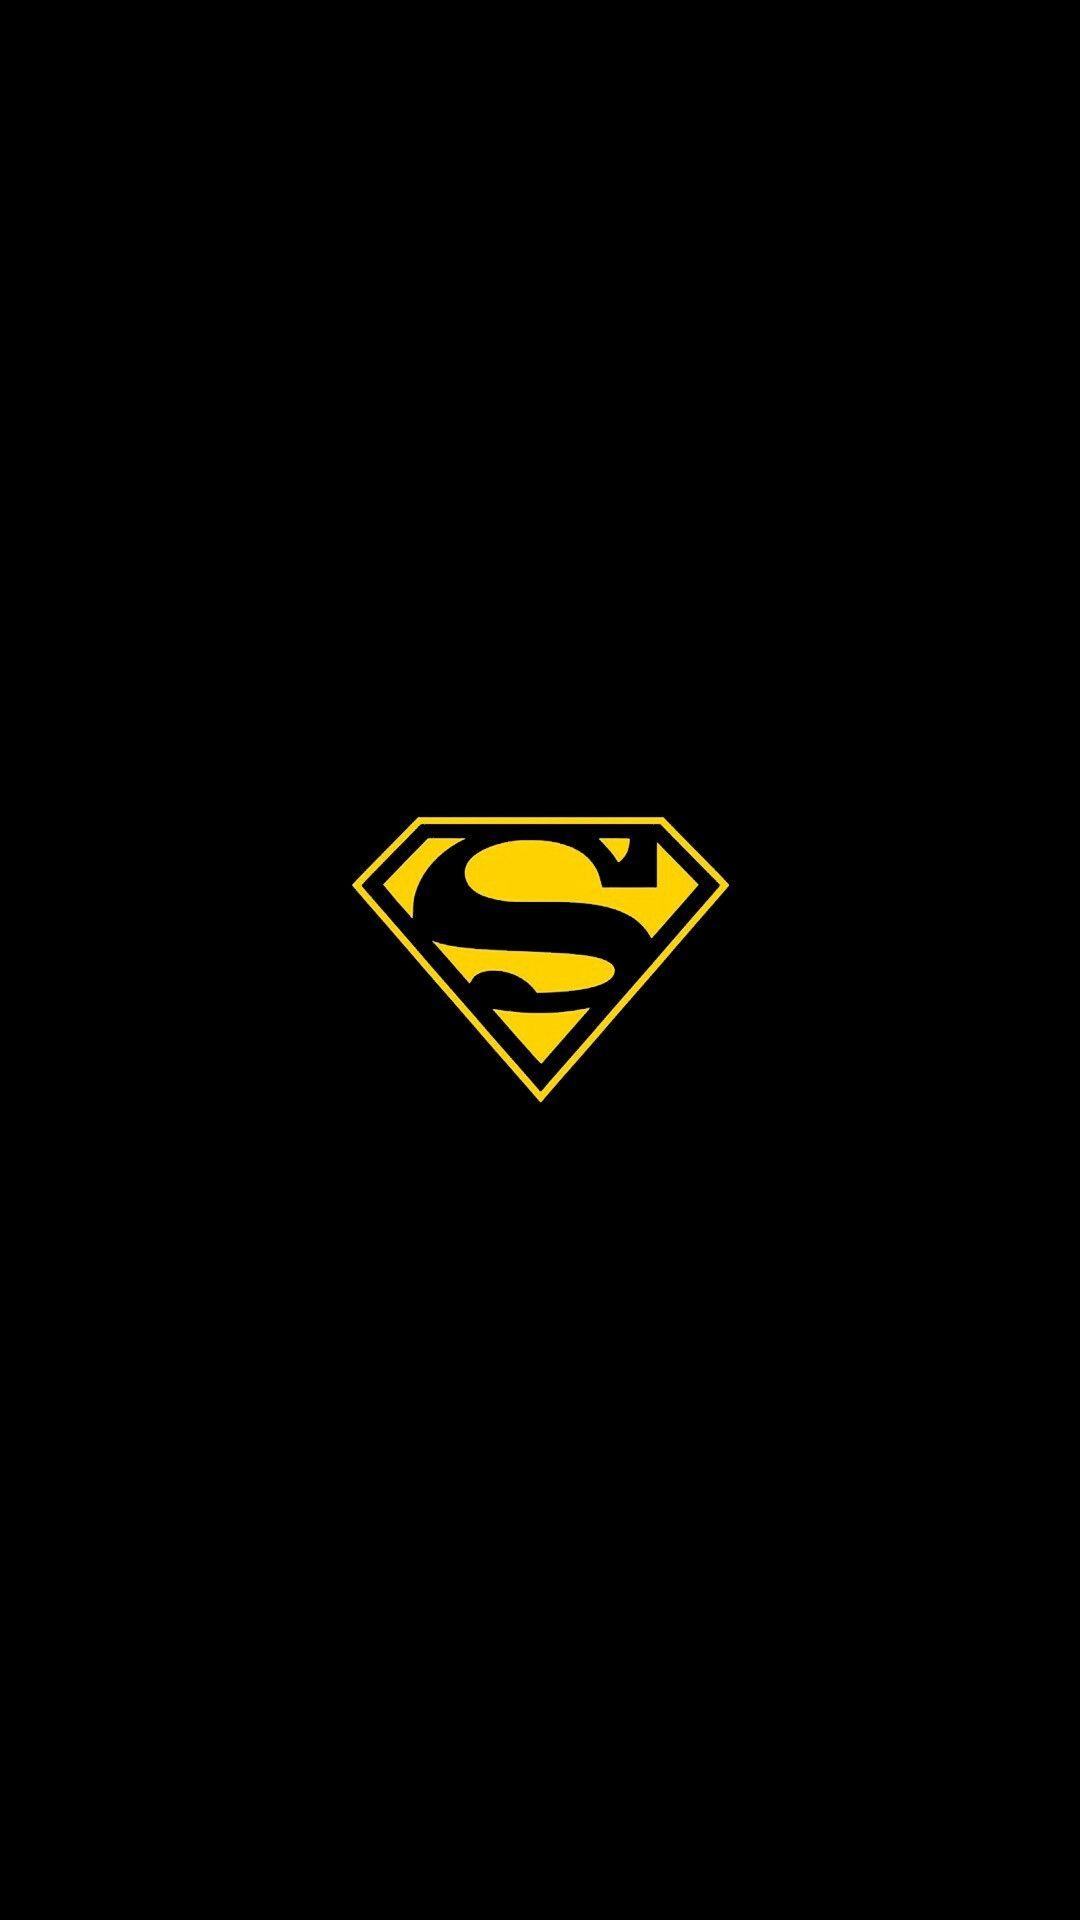 Superman Wallpapers Best Of iPhone 6 Superman Wallpapers 77 Image